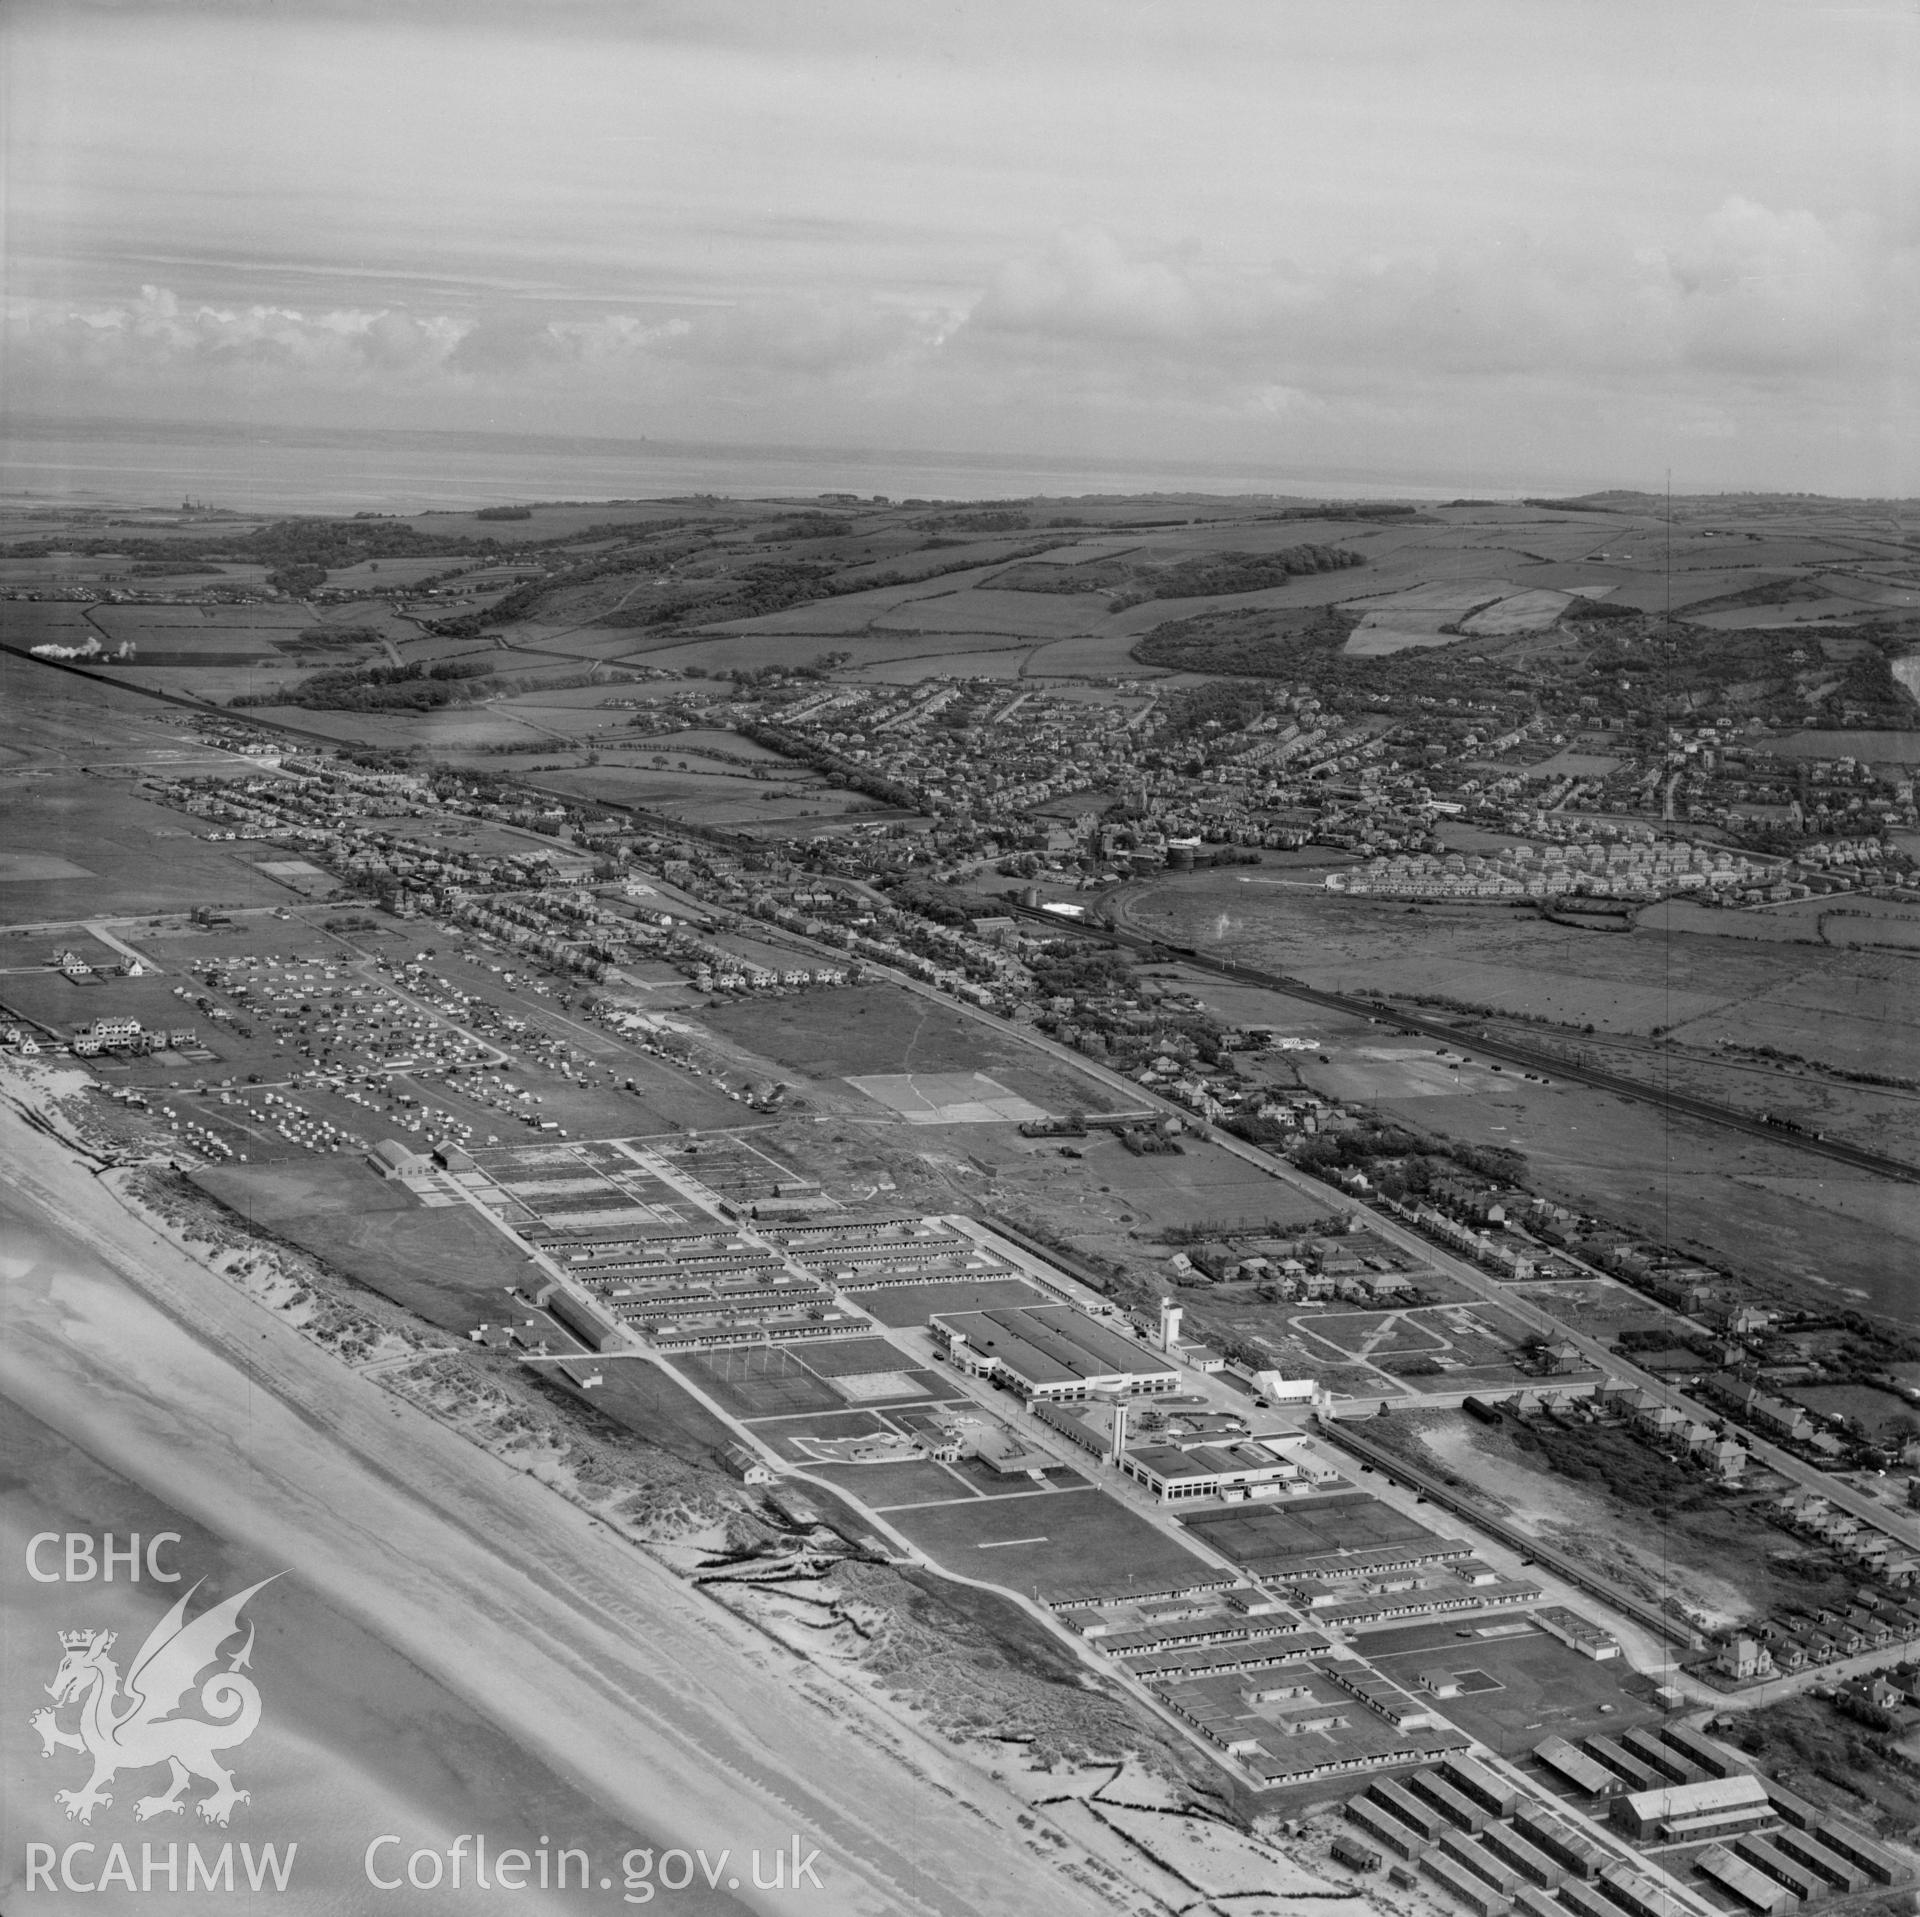 View of Prestatyn showing holiday camps